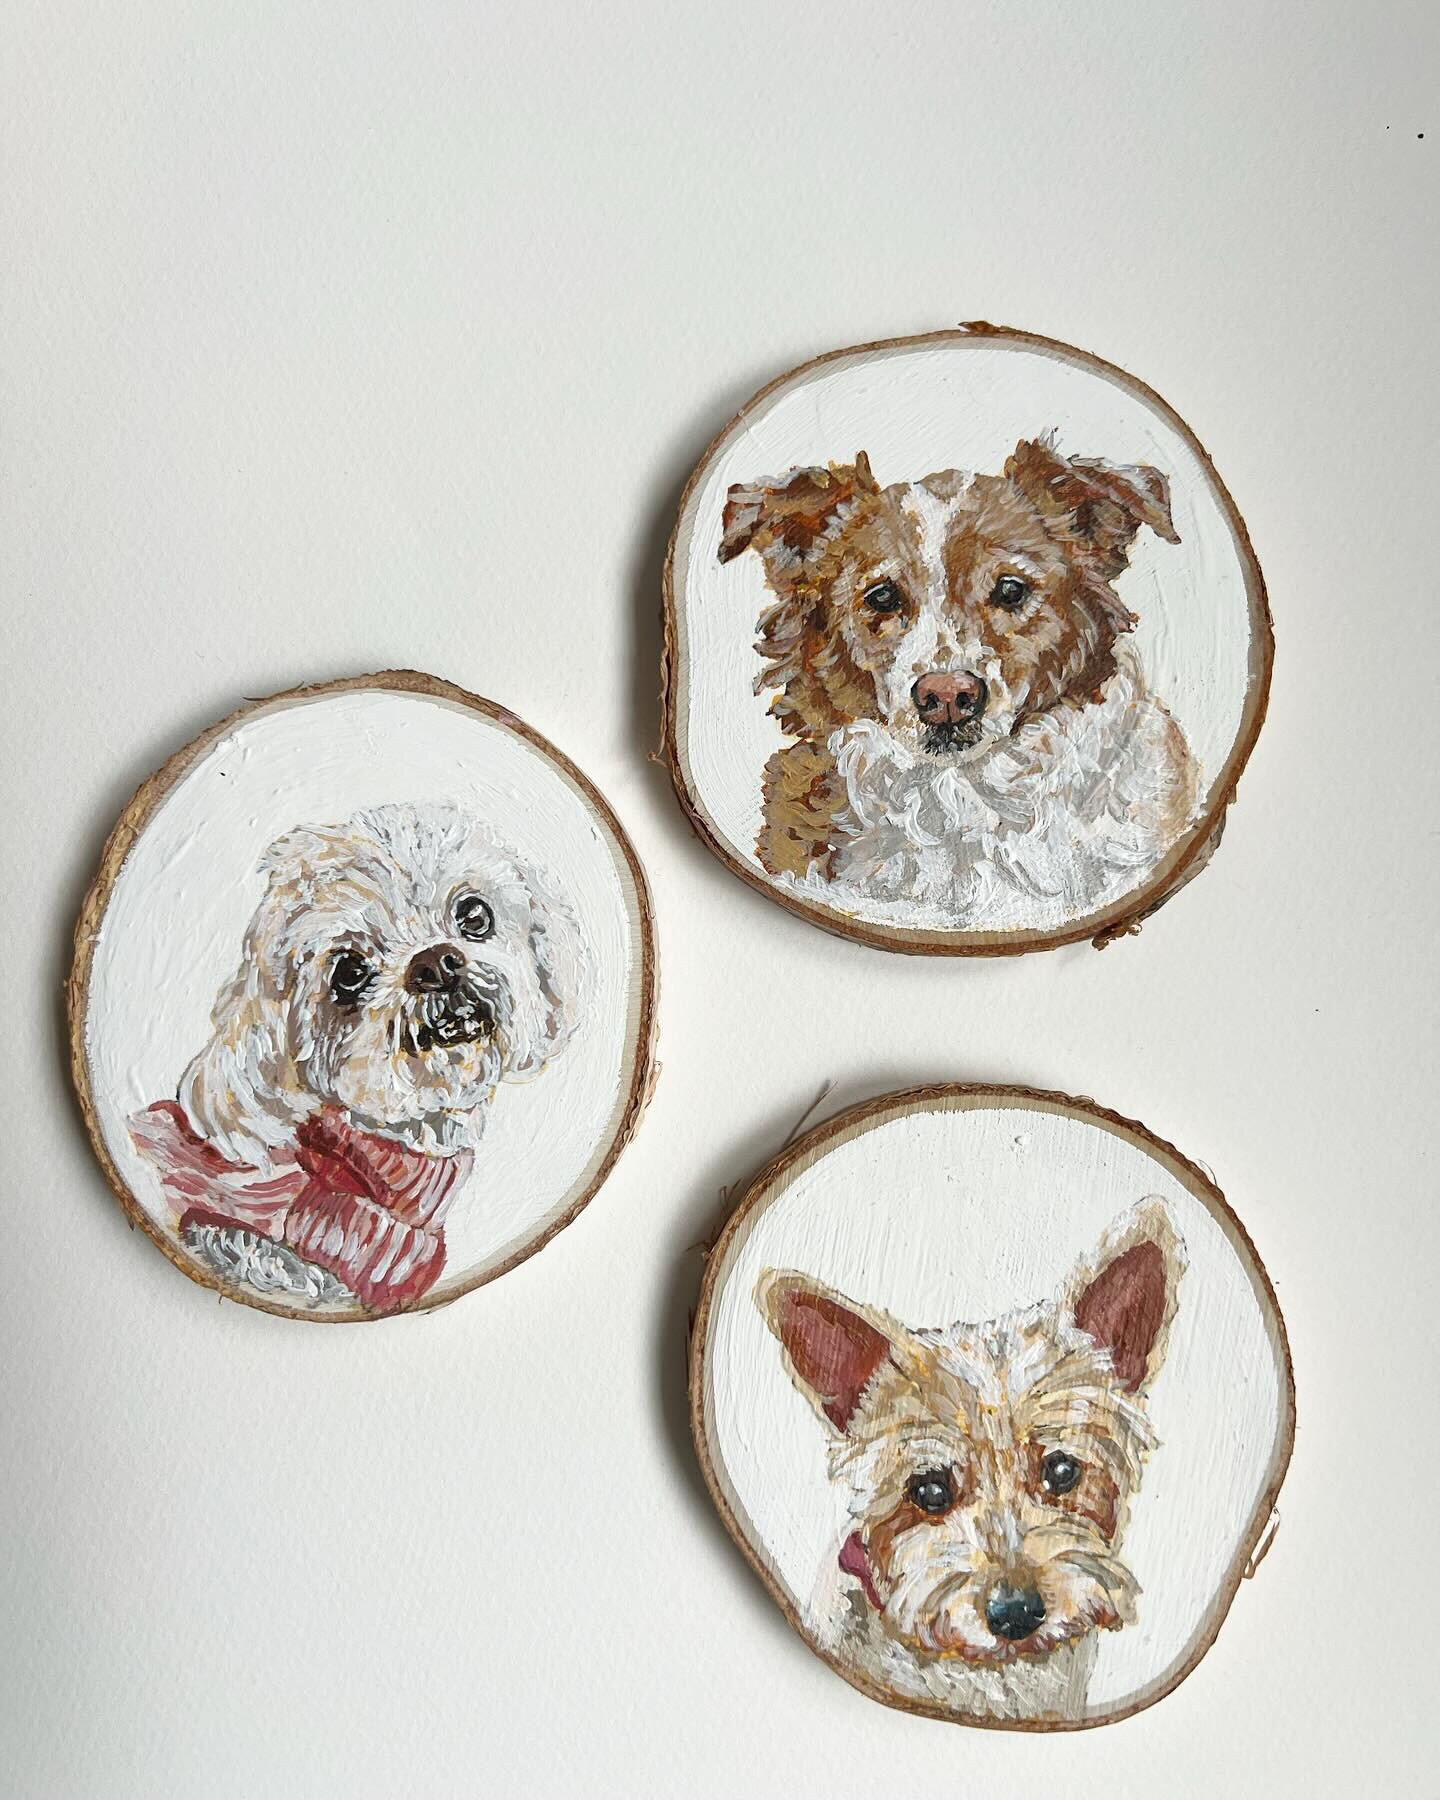 The most popular artwork that I&rsquo;ve painted have been these sweet little pet ornaments. I started painting custom pet ornaments during Christmas a few years ago. I sell them throughout the entire year and I love each and every one I paint. These